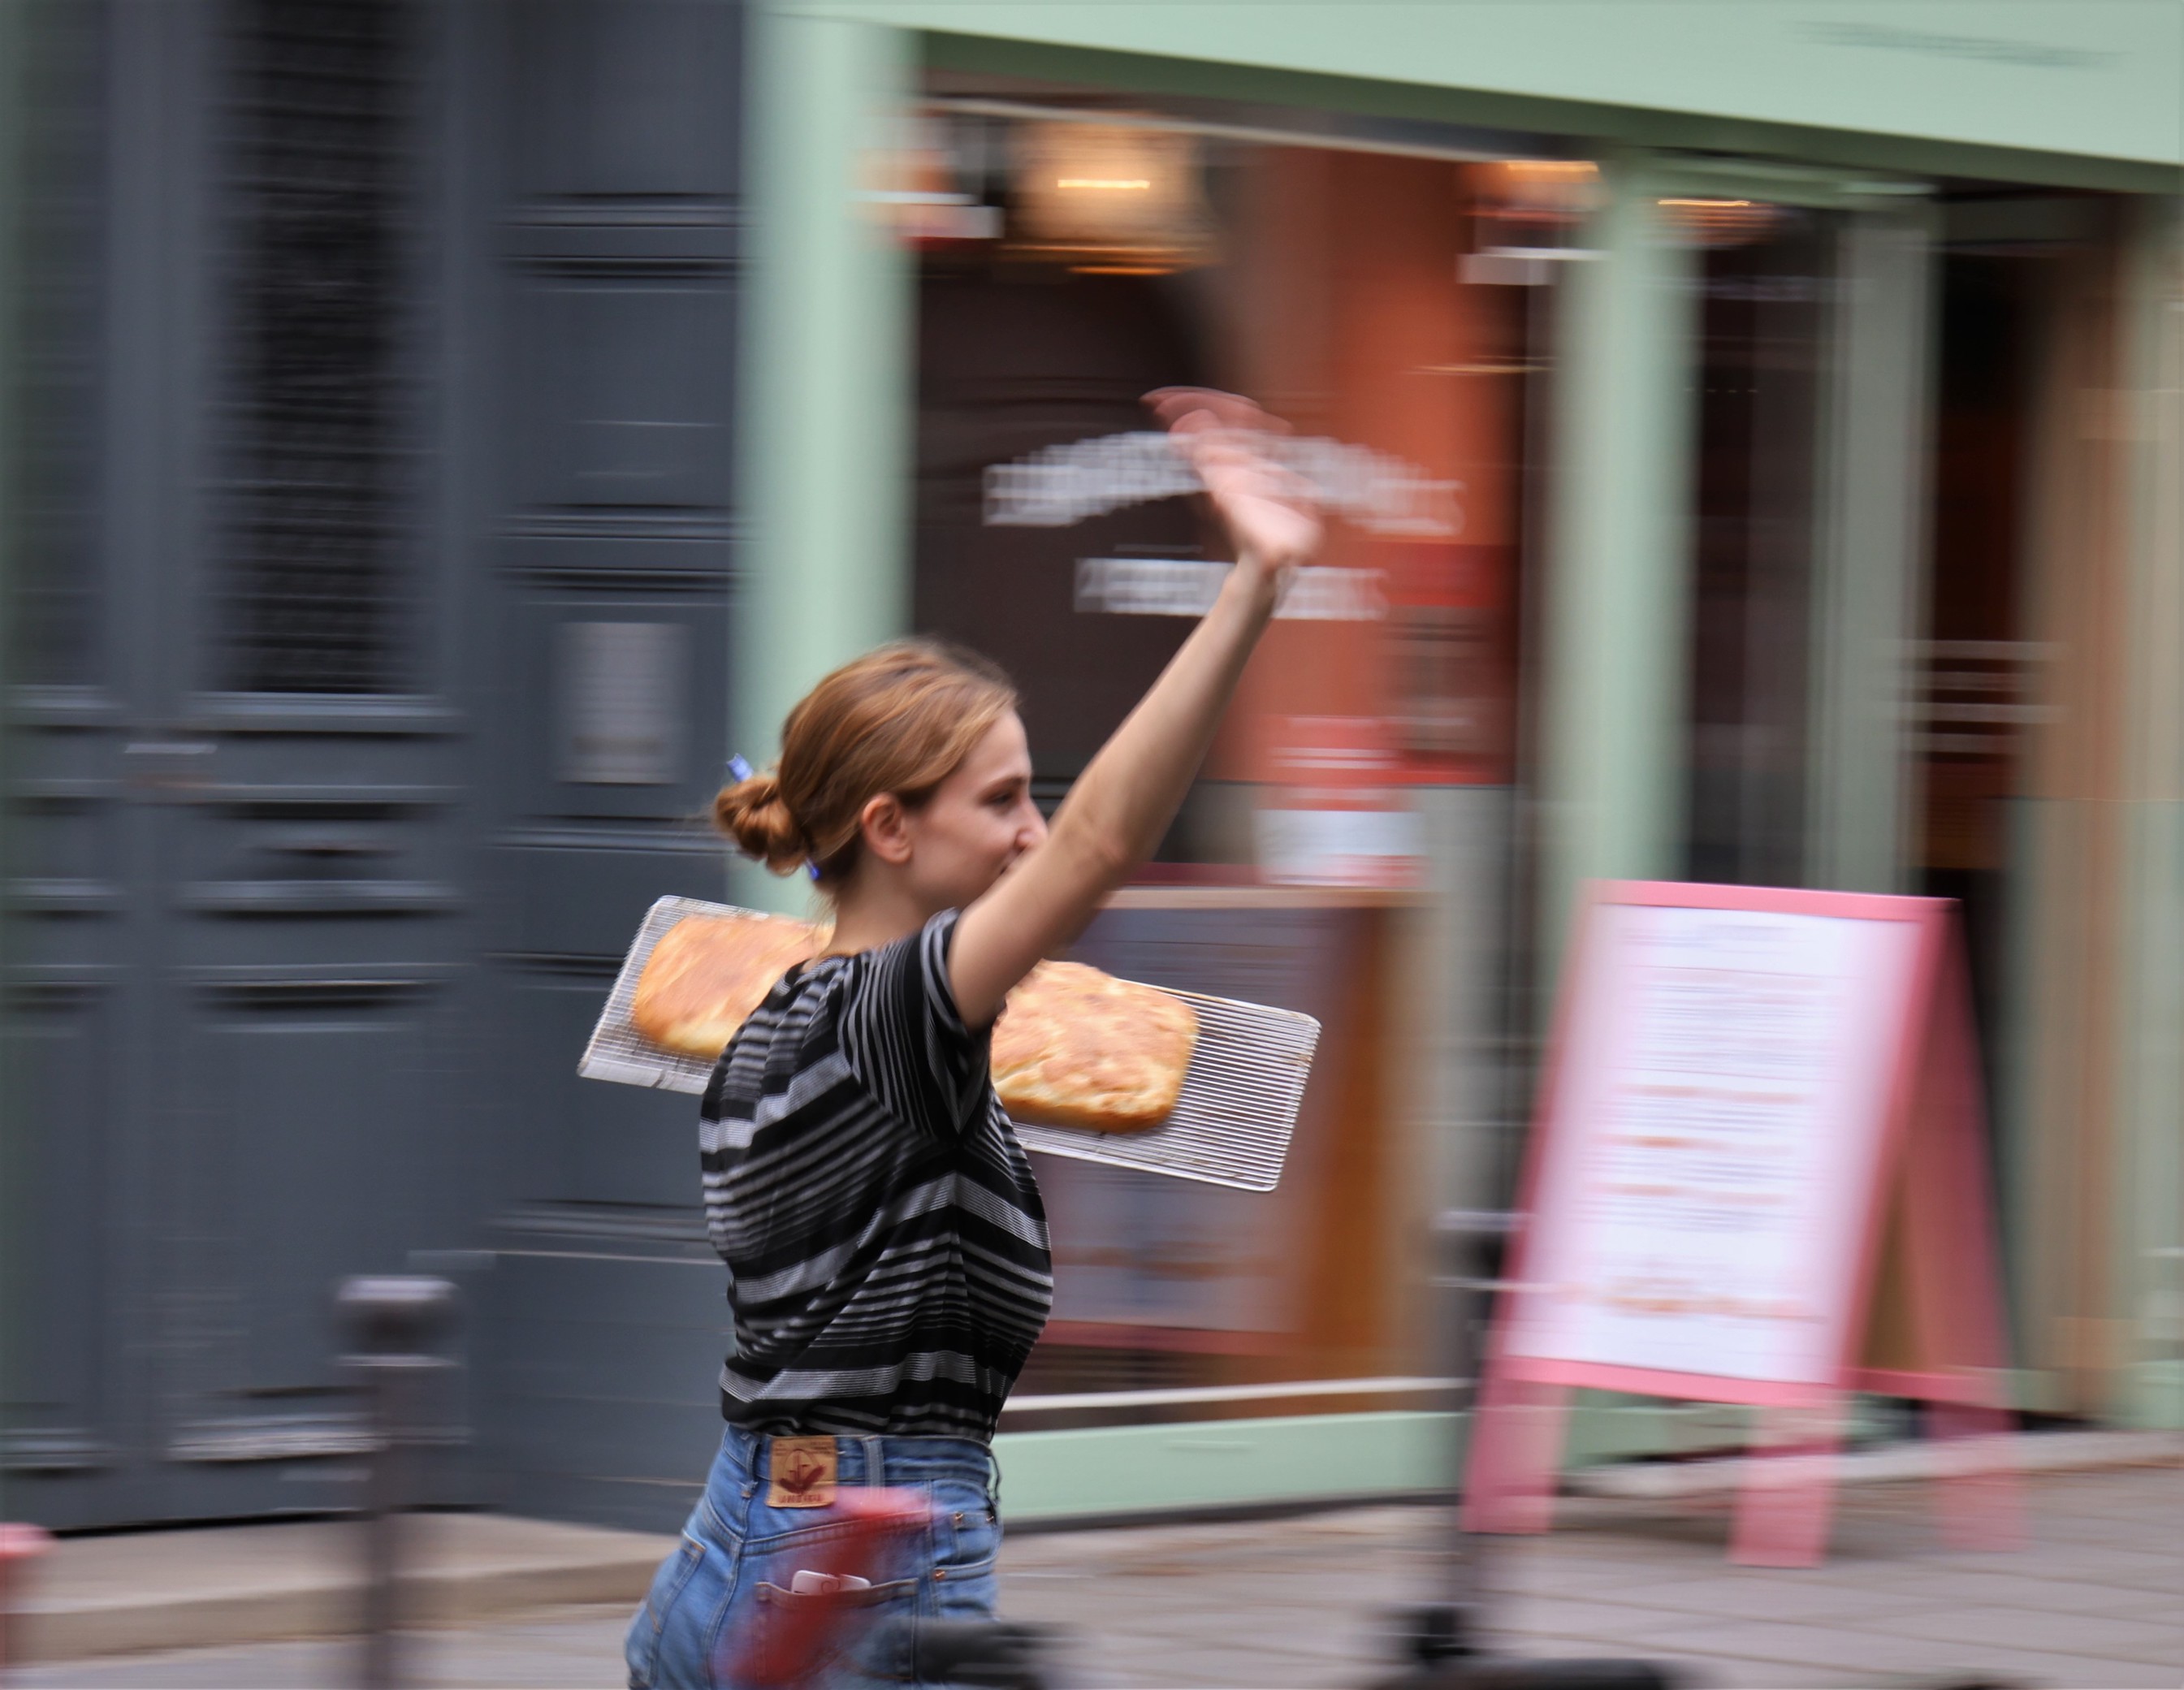 A Parisian woman carries a tray of freshly baked bread from Boulangerie du Sentier to a restaurant.